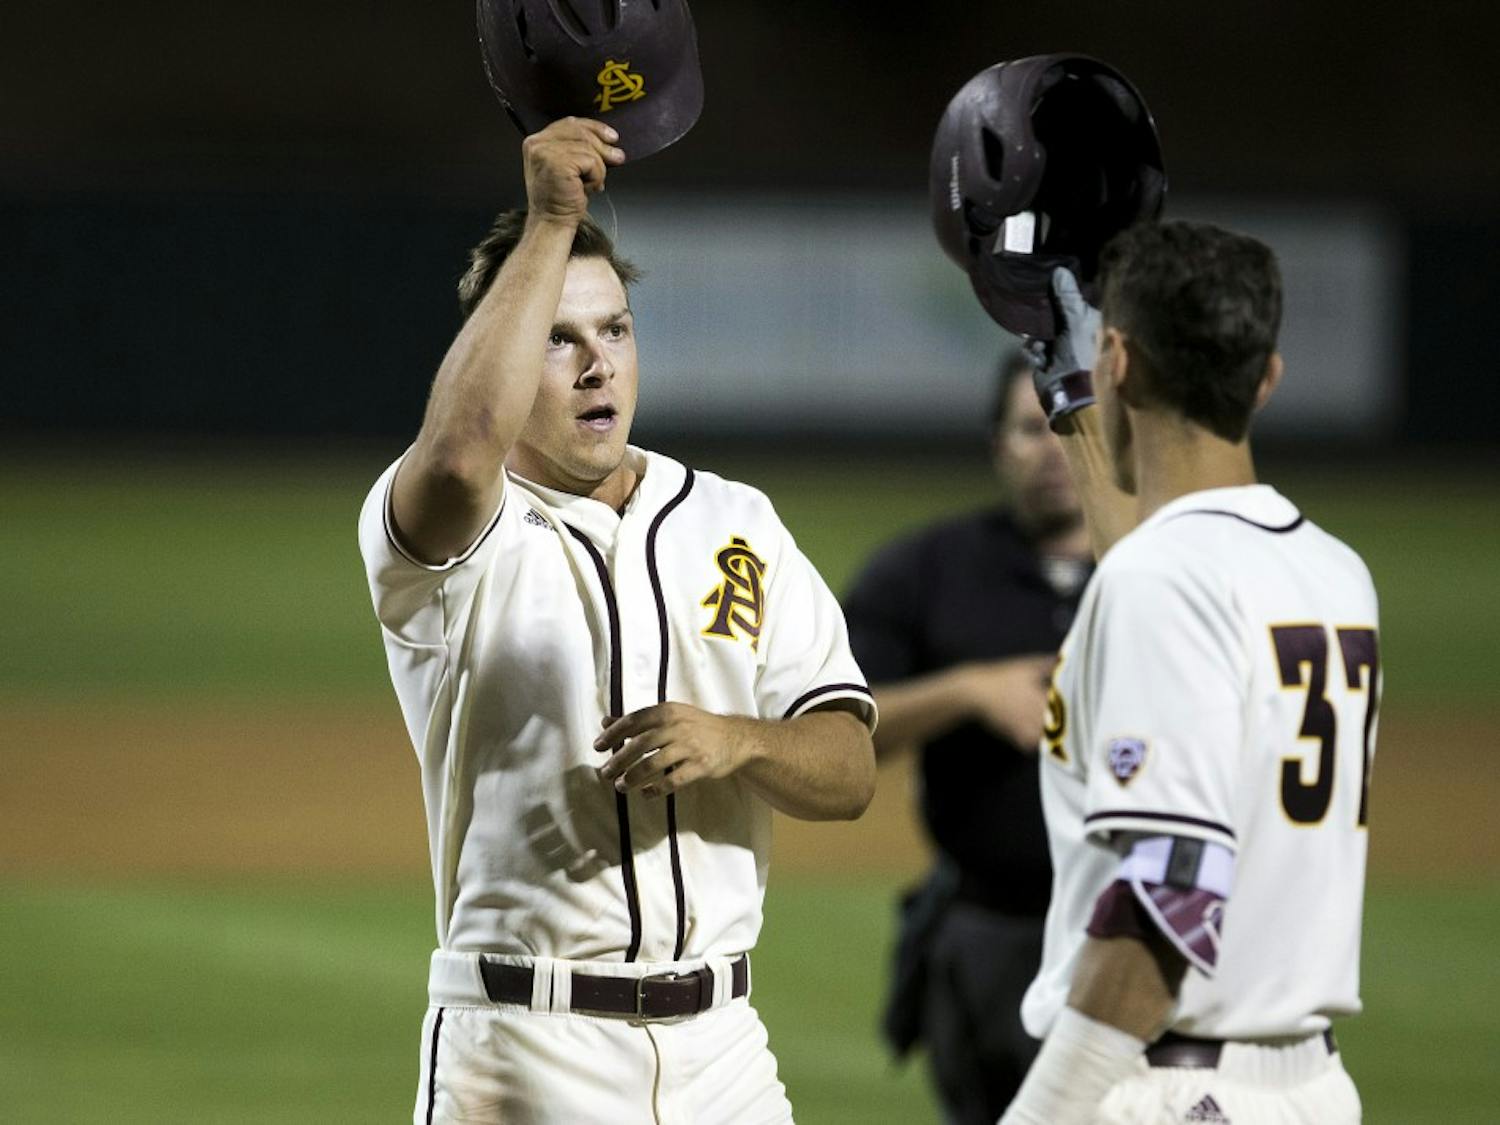 ASU baseball's David Greer, left, celebrates with teammate Colby Woodmansee after scoring a home run during a game against the University of Arizona Wildcats at Phoenix Municipal Stadium in Phoenix, Arizona, on Tuesday, April 12, 2016. 